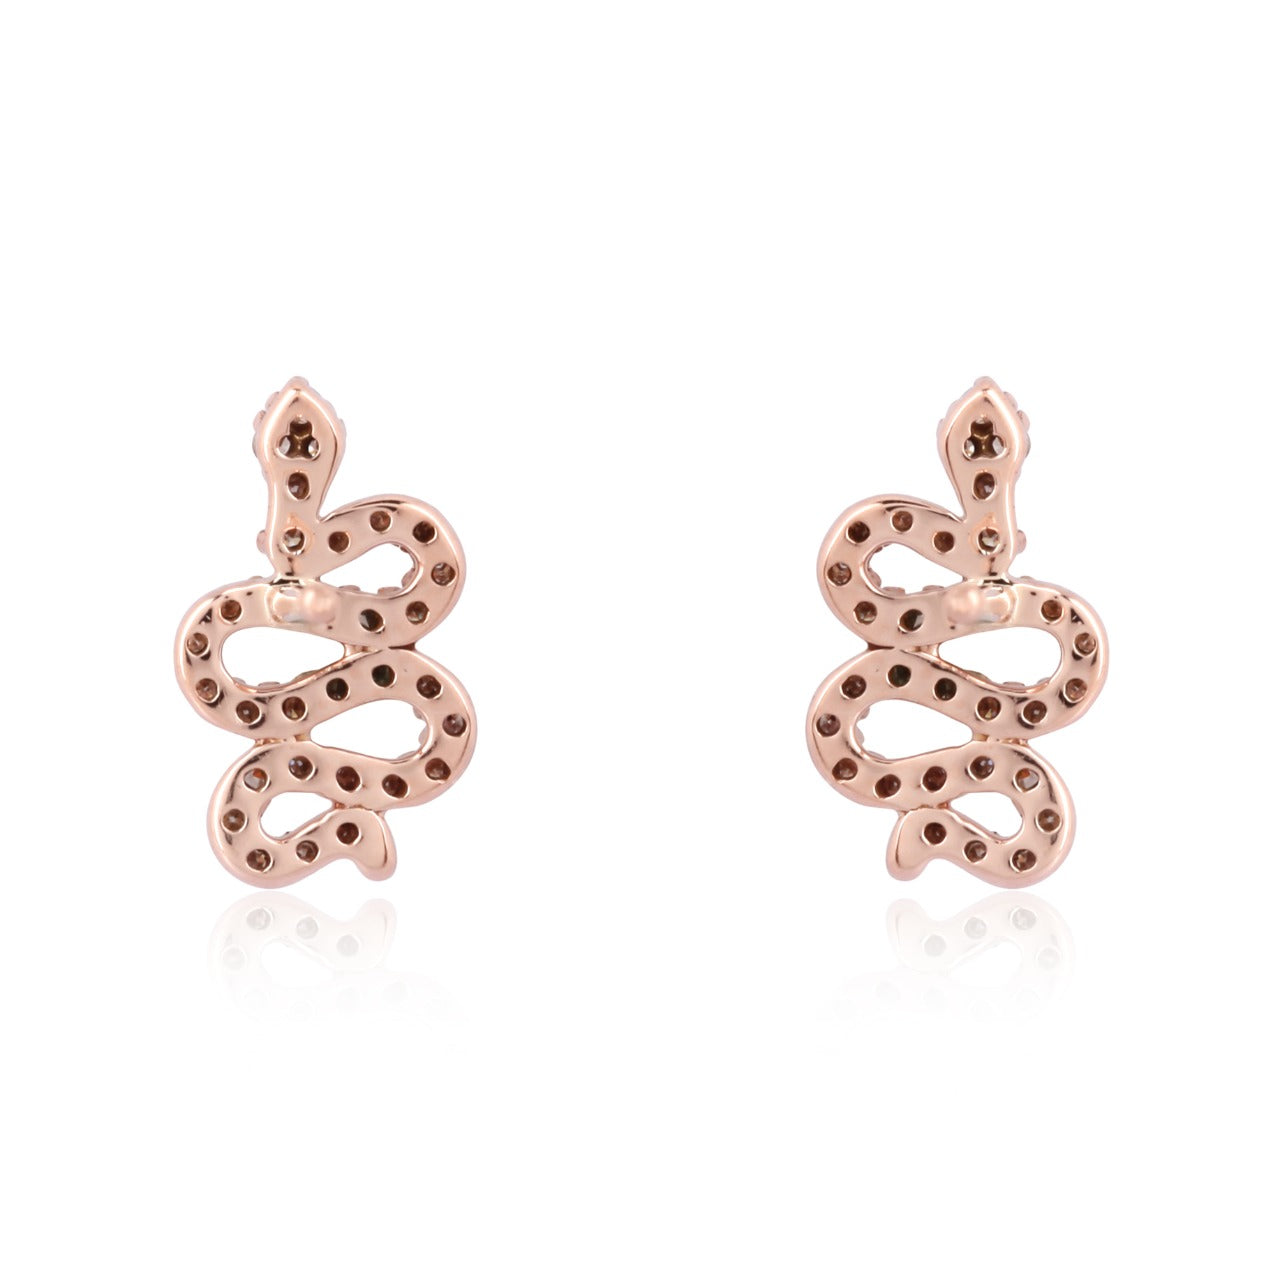 Viper Rose Gold Snake Ear Studs with Diamonds by SOPHIE HERMANN